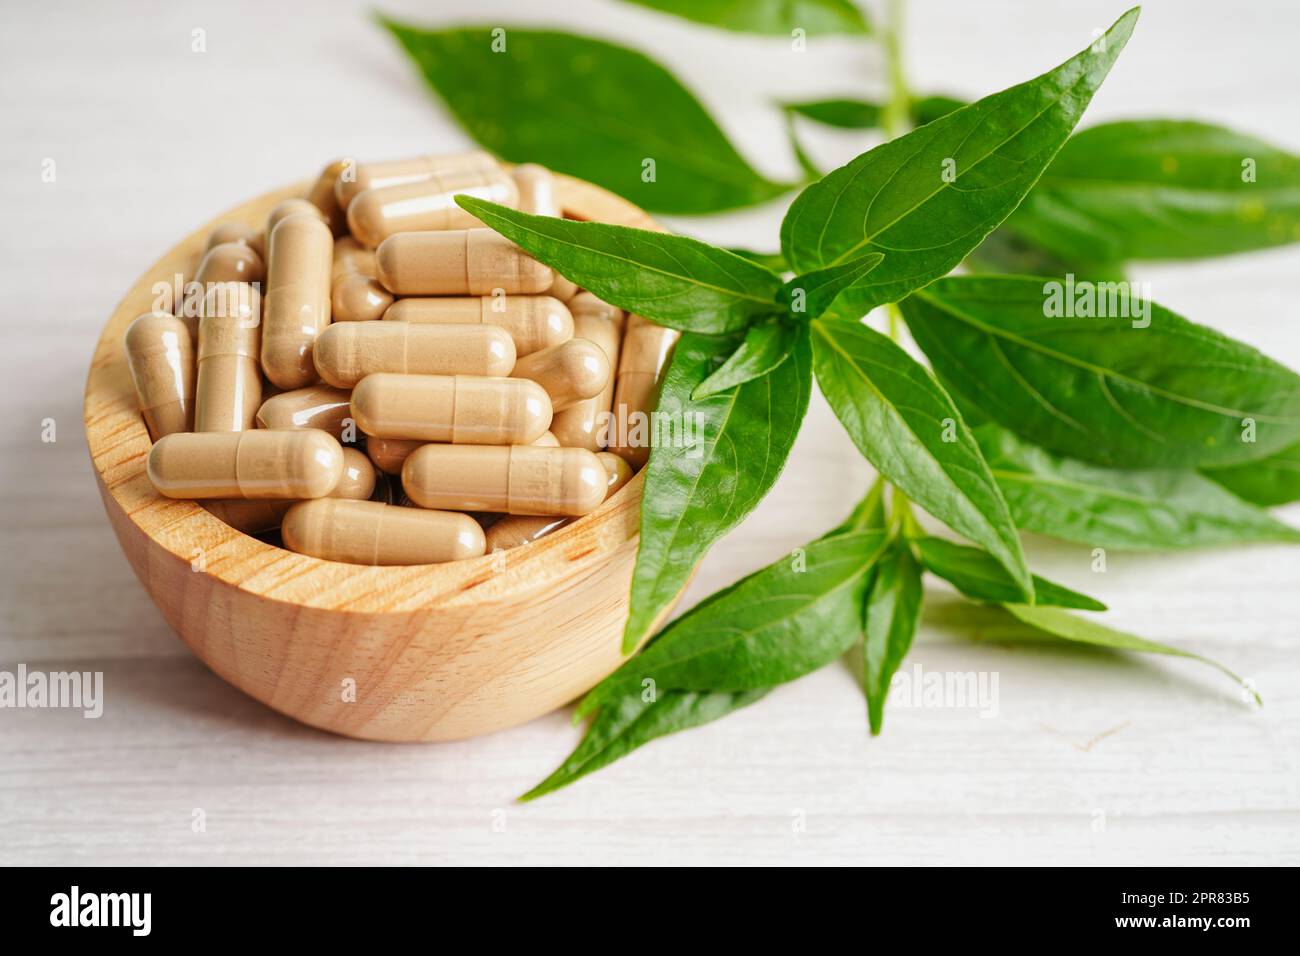 Andrographis paniculata or Kariyat leaf plant with herb capsules to treating covid19 coronavirus infection. Stock Photo